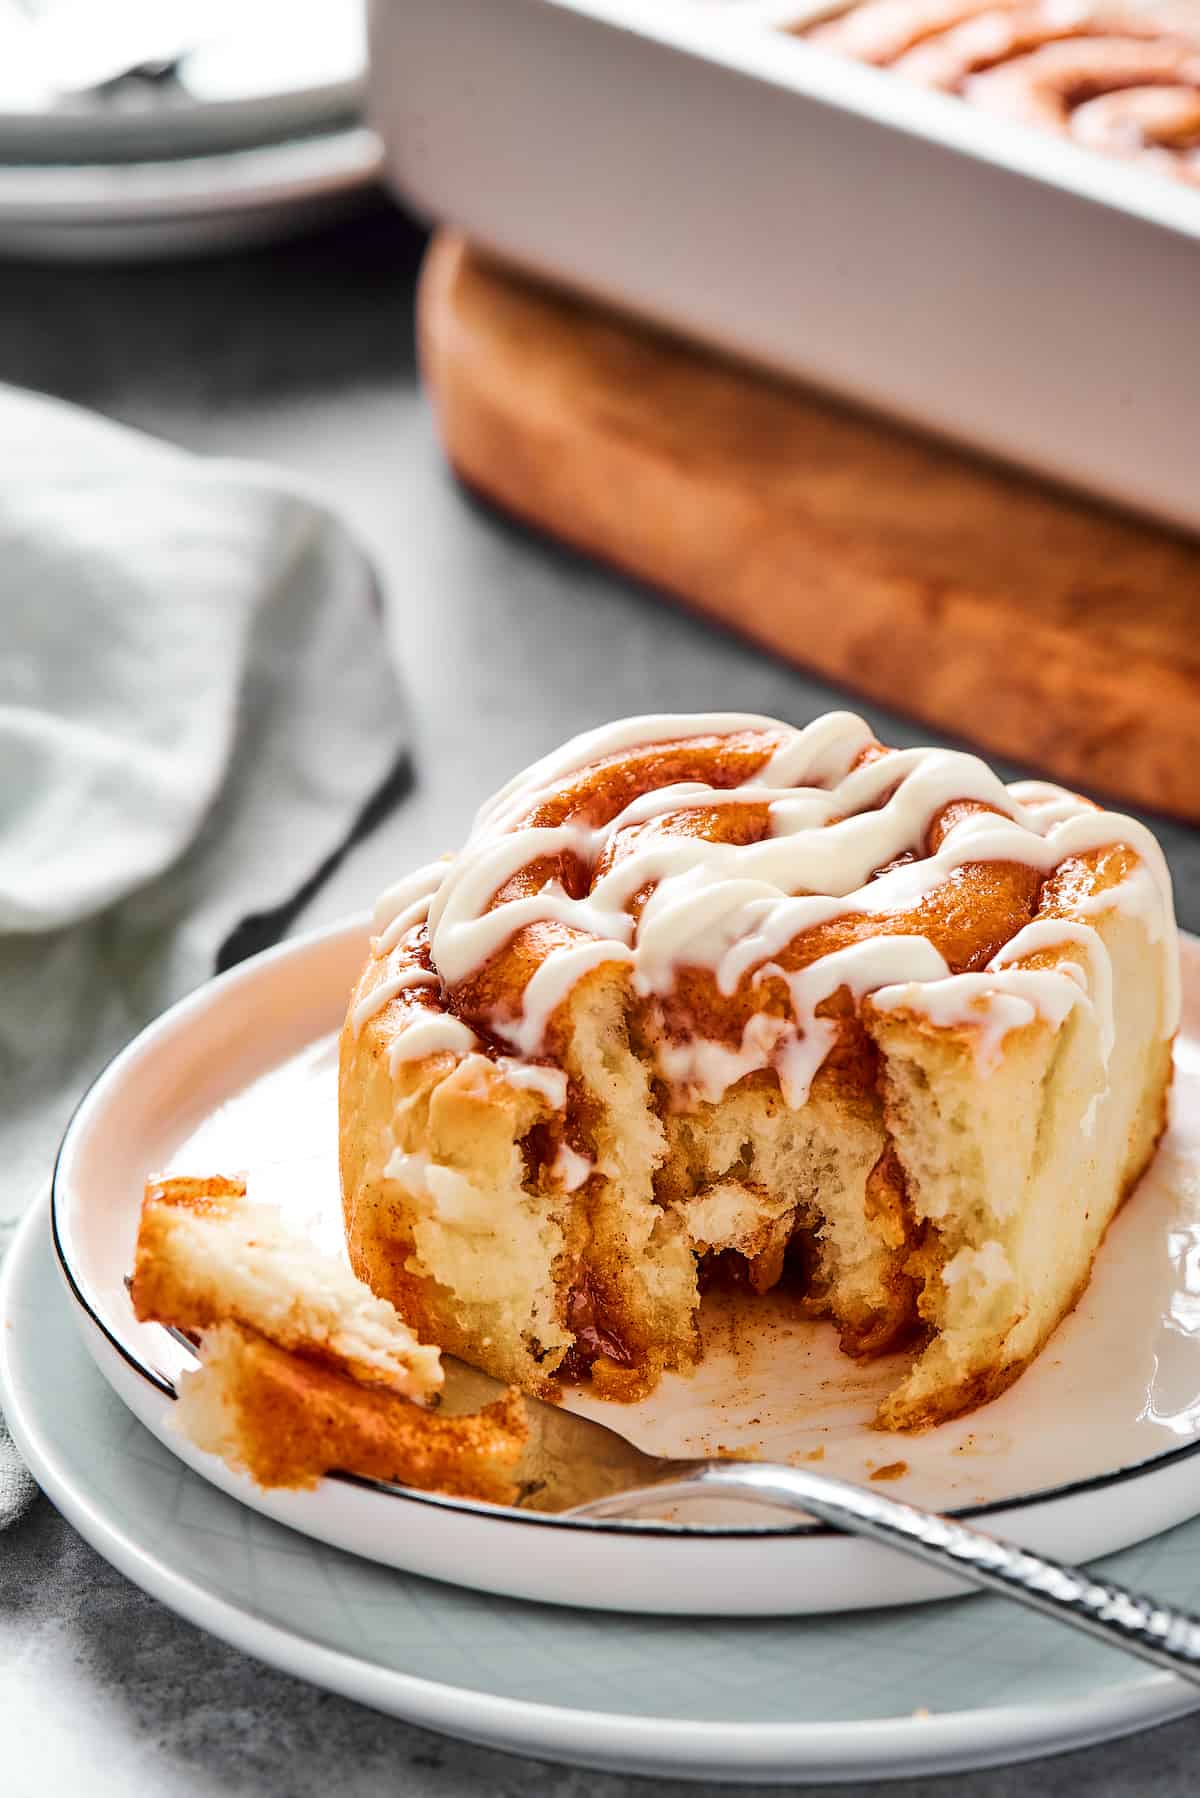 A bitten cinnamon bun on a small plate with a fork.